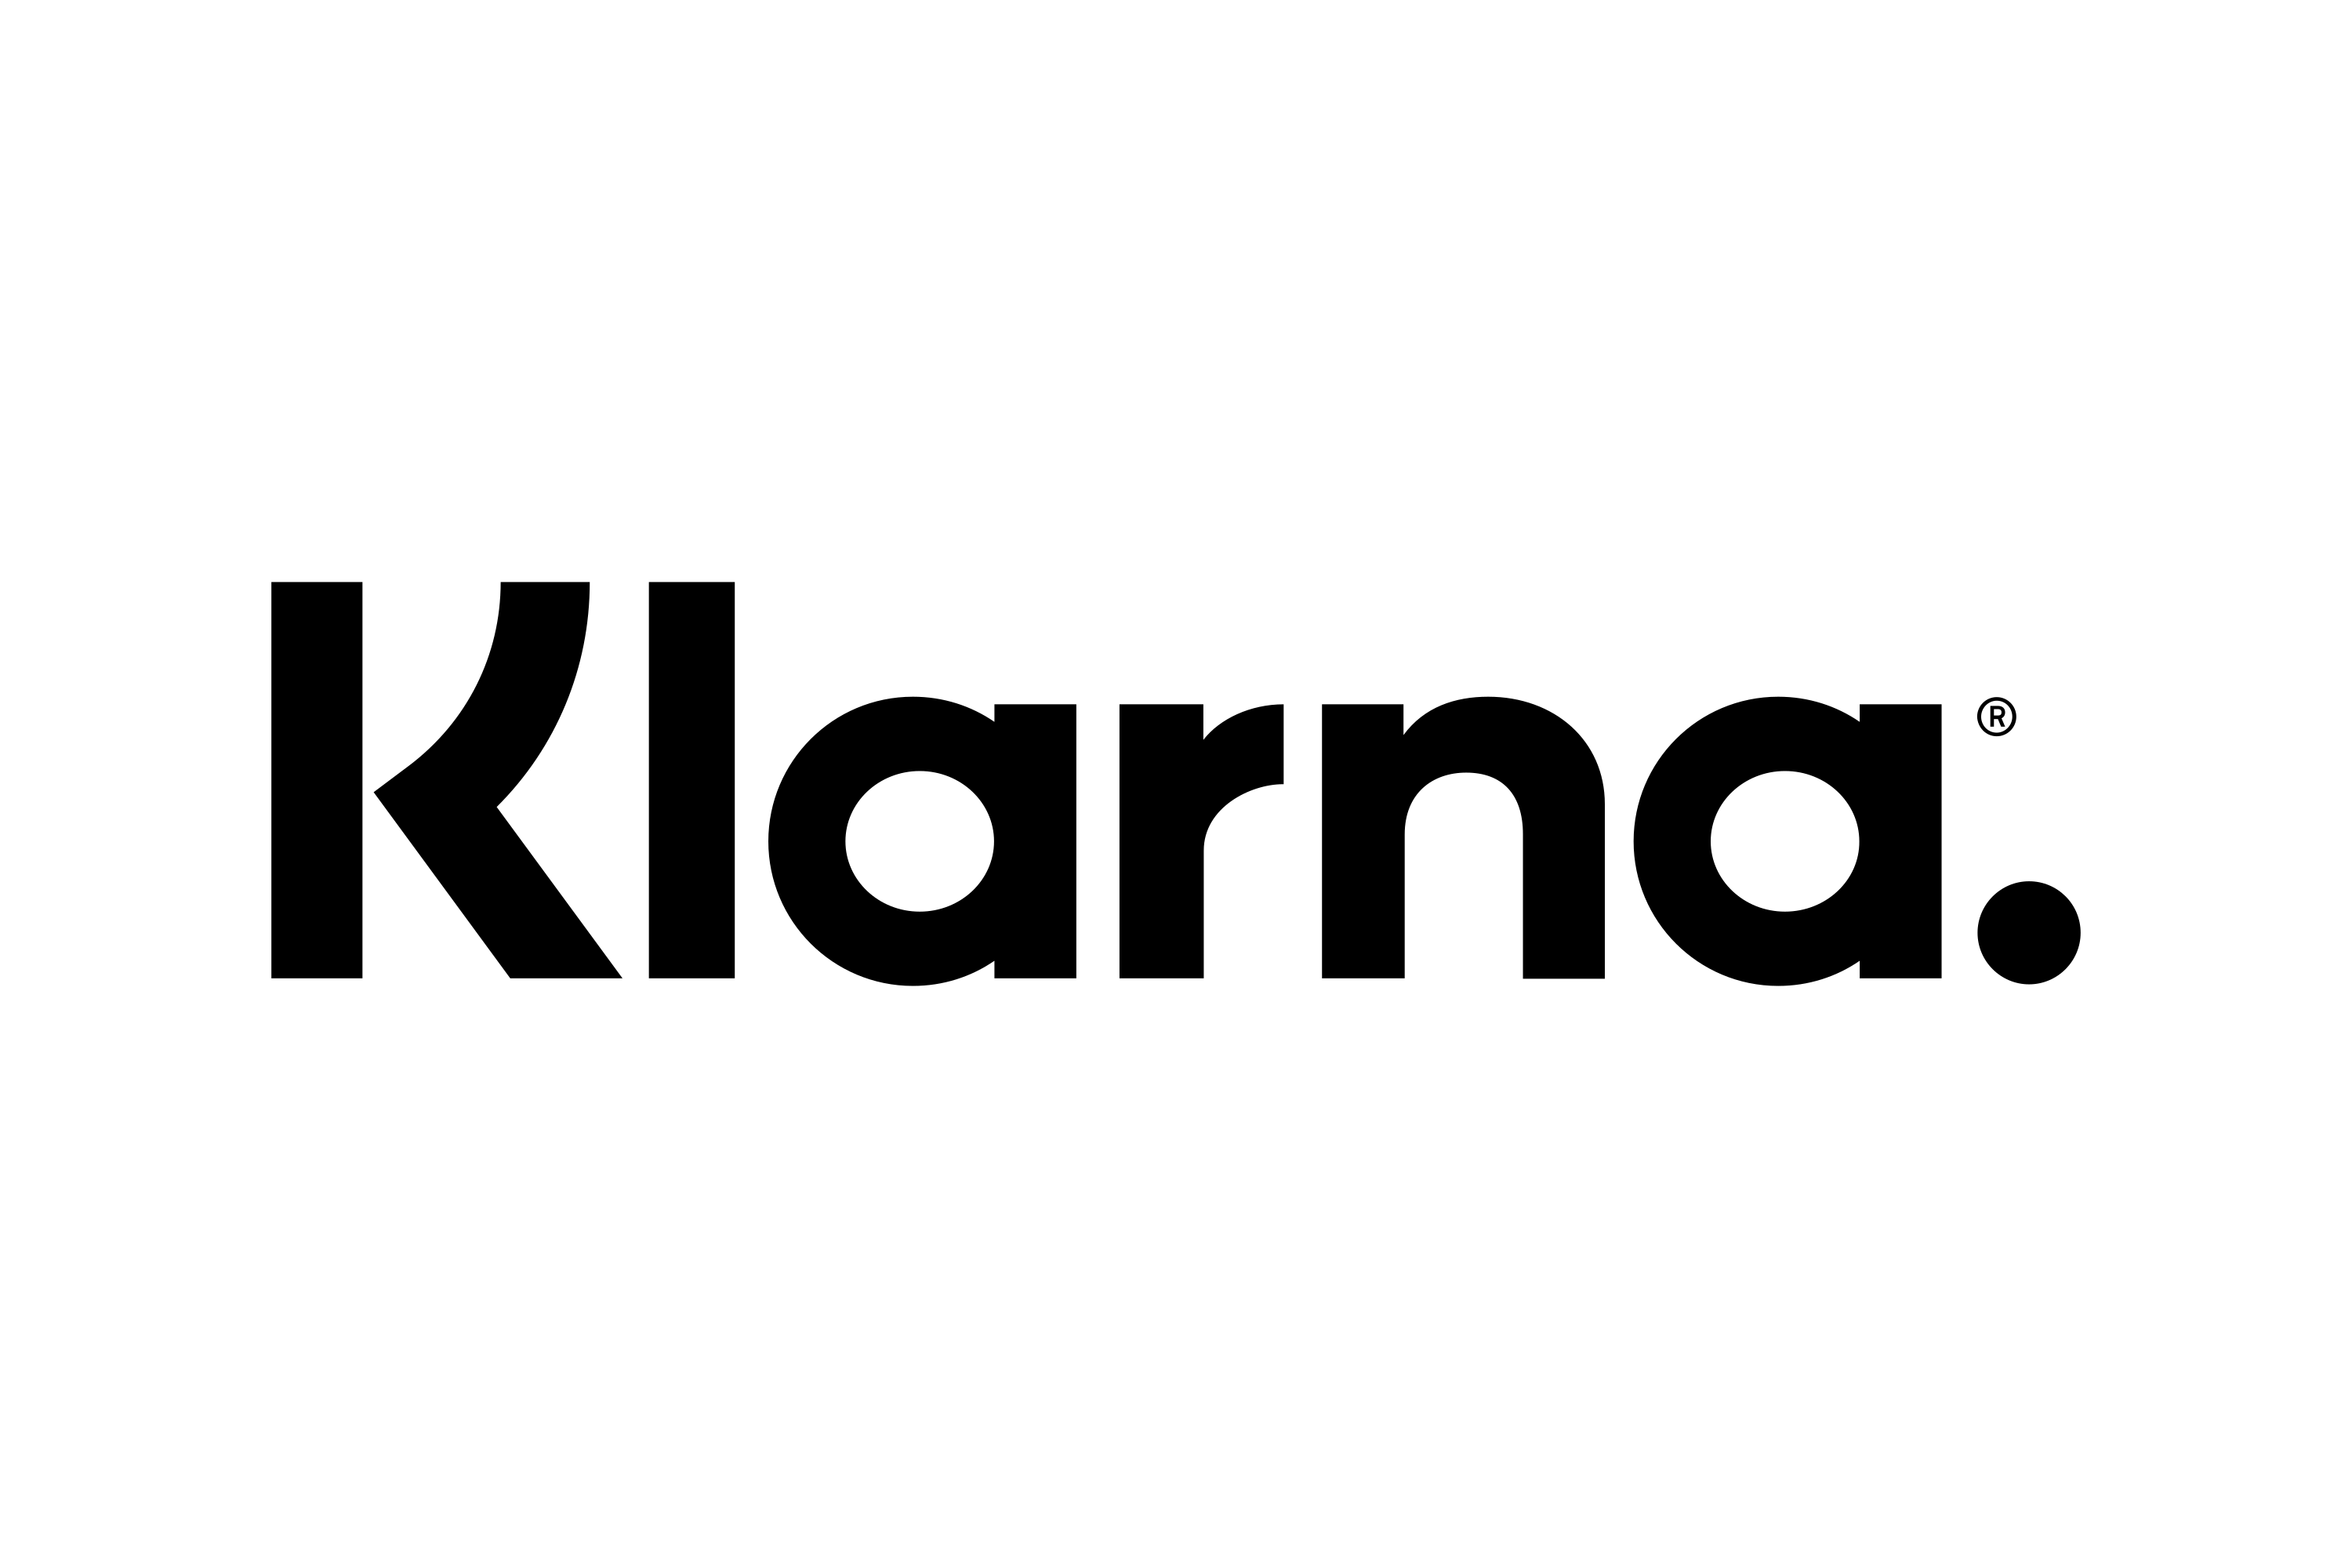 Klarna-Logo-Foot World stocking authentic Jordan Nike Adidas find the sneakers you want